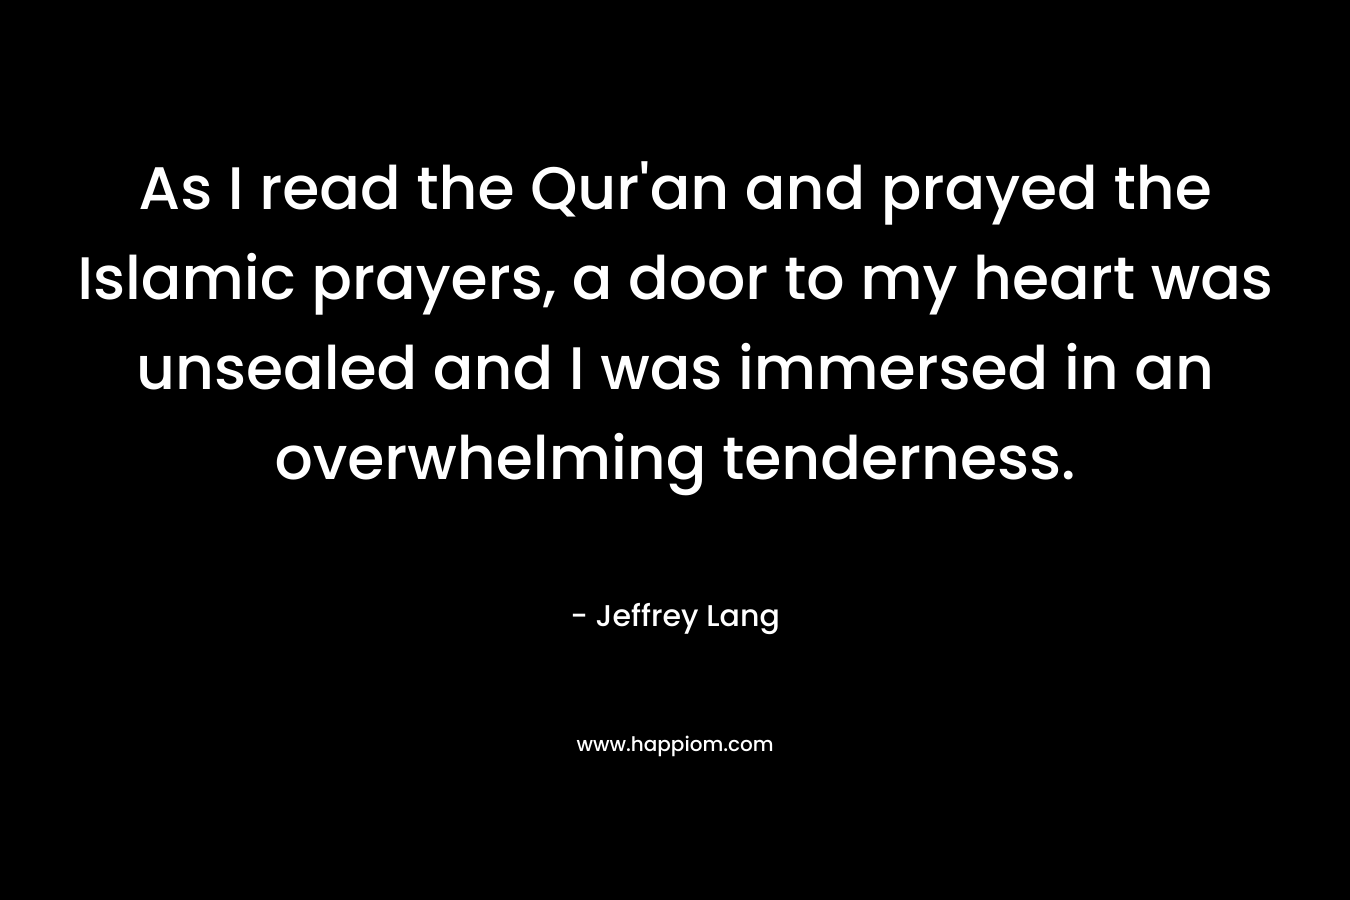 As I read the Qur'an and prayed the Islamic prayers, a door to my heart was unsealed and I was immersed in an overwhelming tenderness.